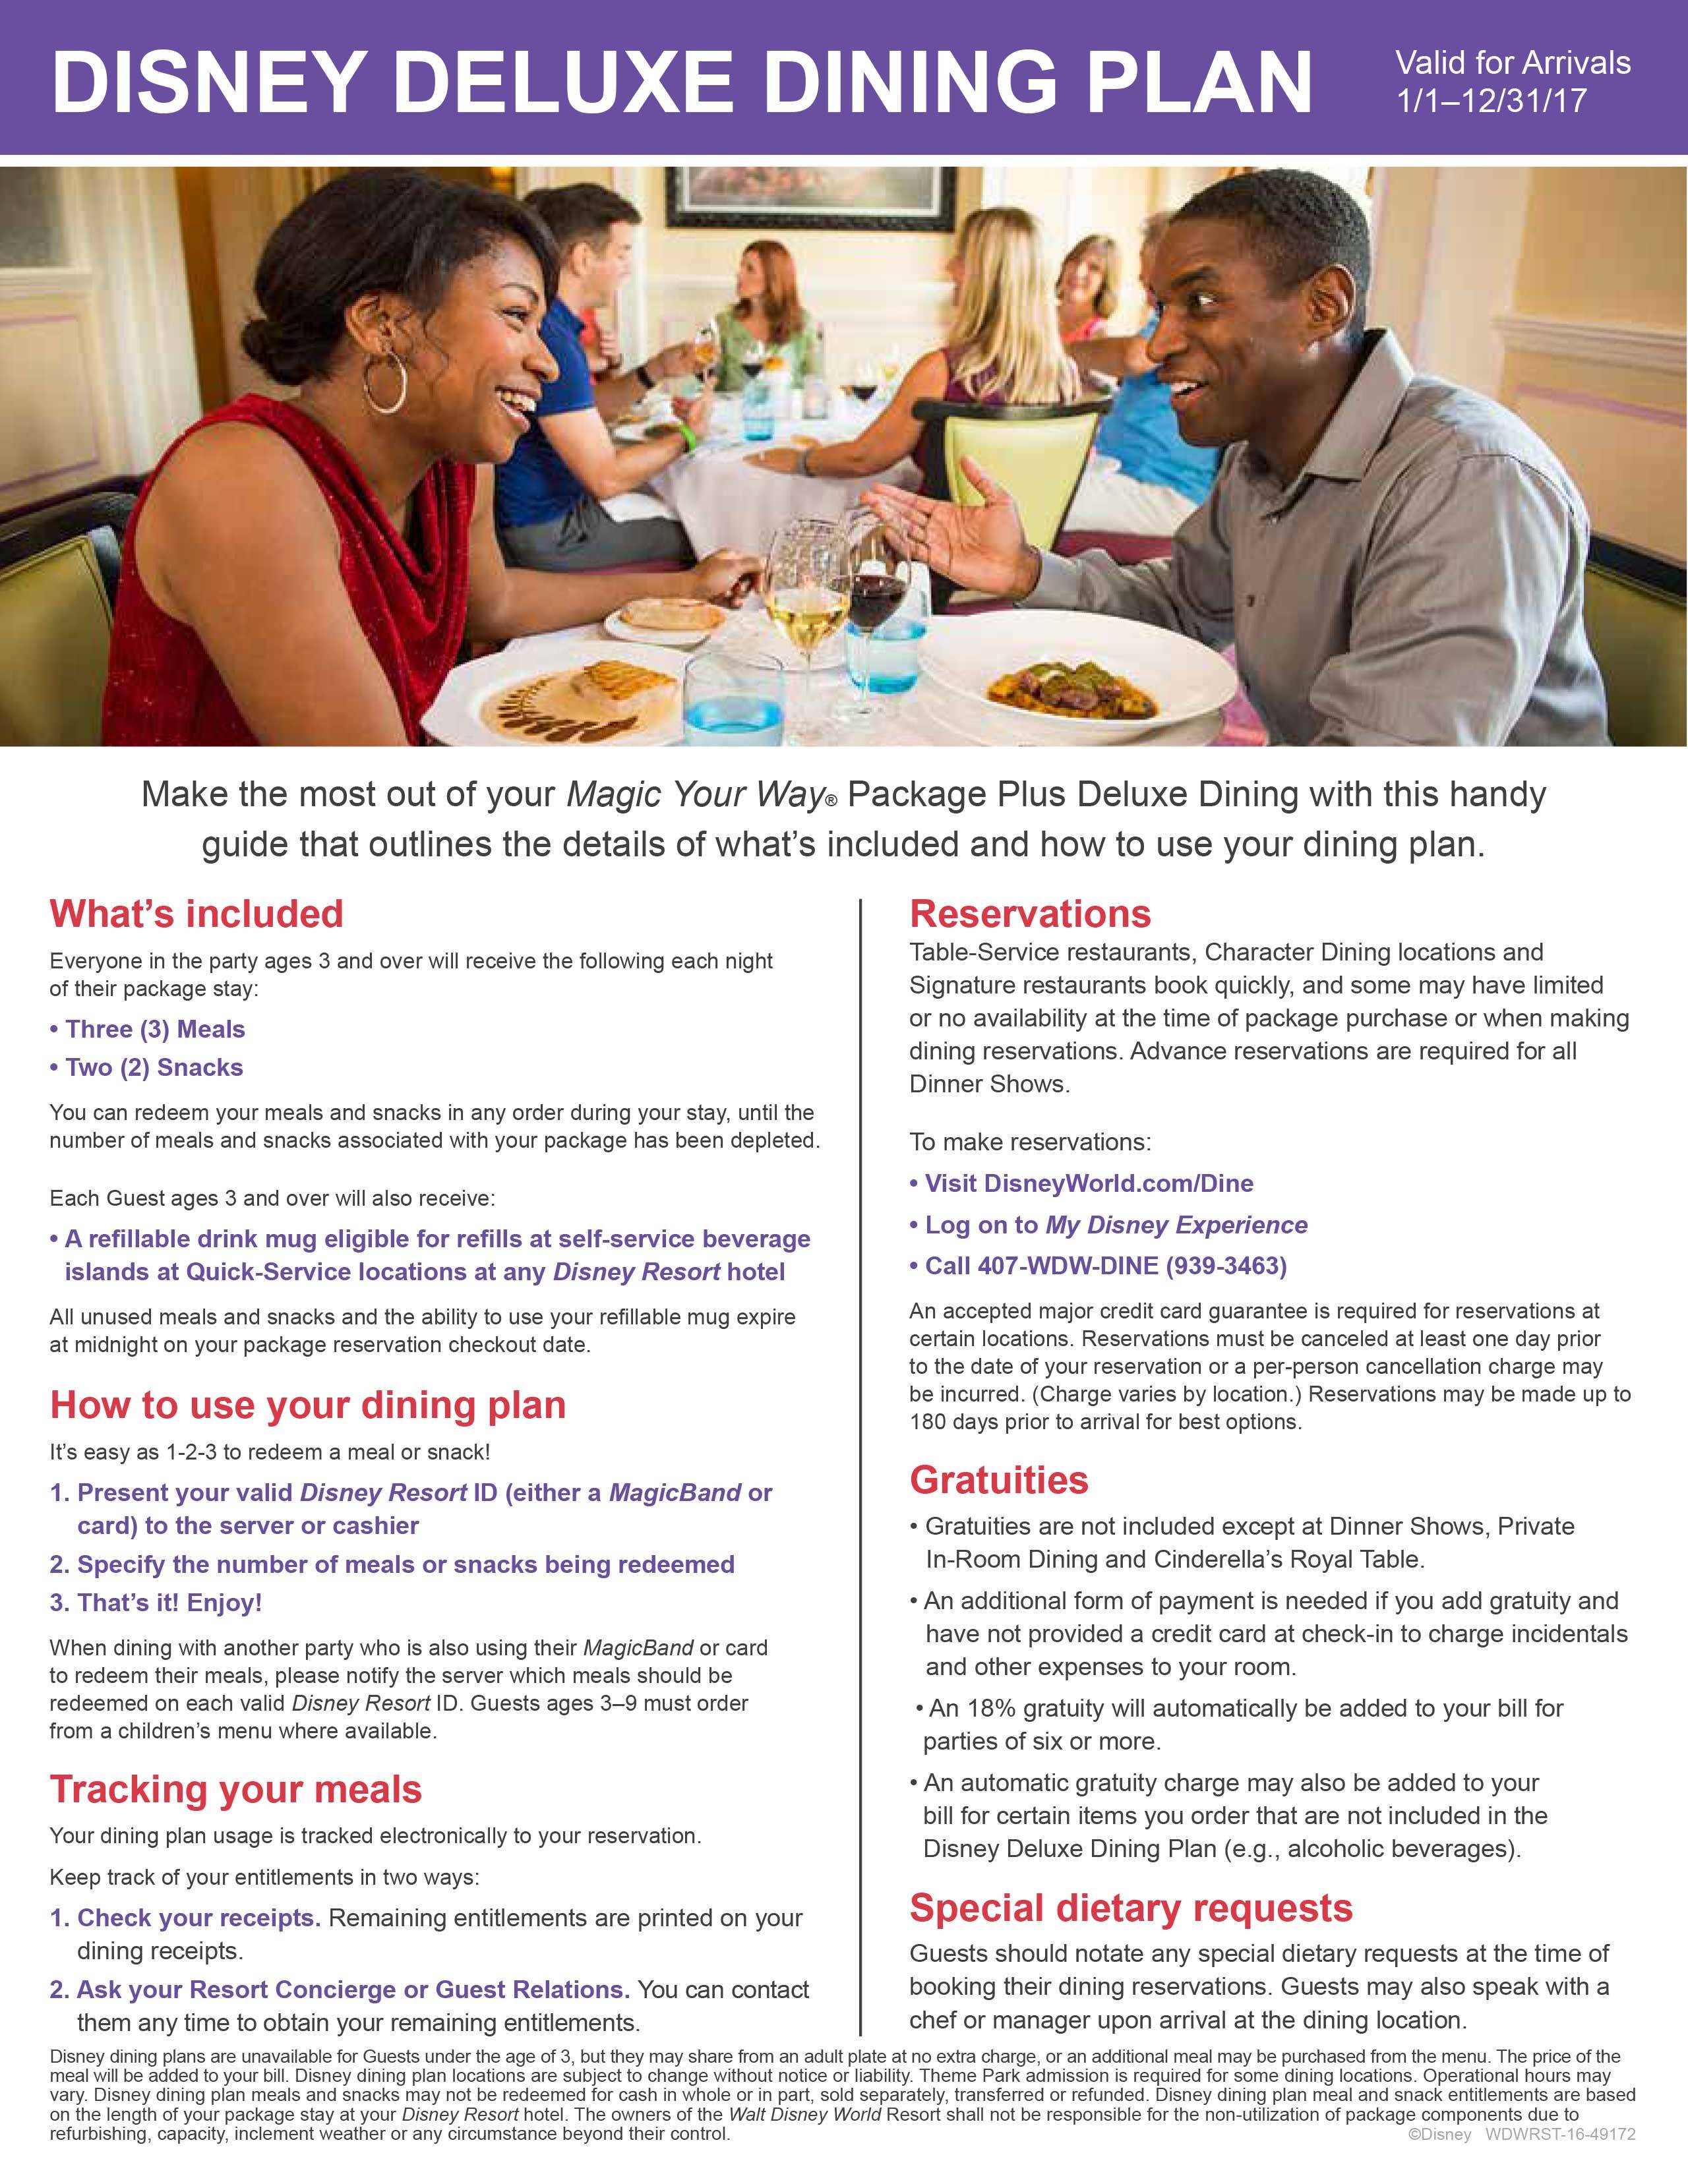 2017 Disney Deluxe Dining Plan brochure - Page 1